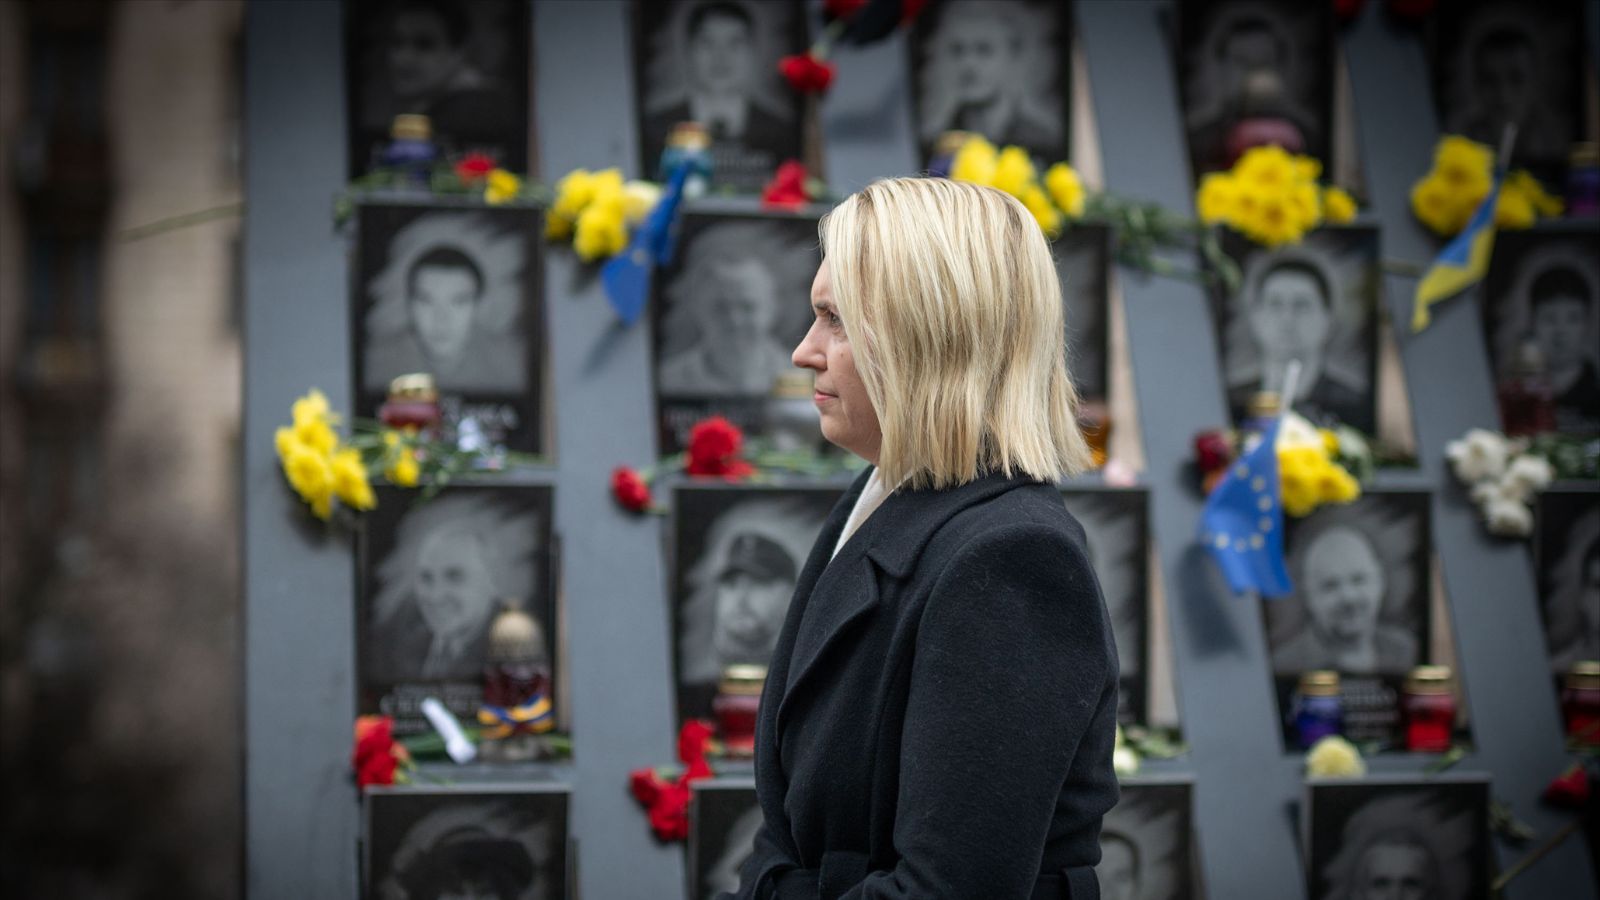 Ambassador Brink stands in front of a memorial wall with photos, candles, and flowers.